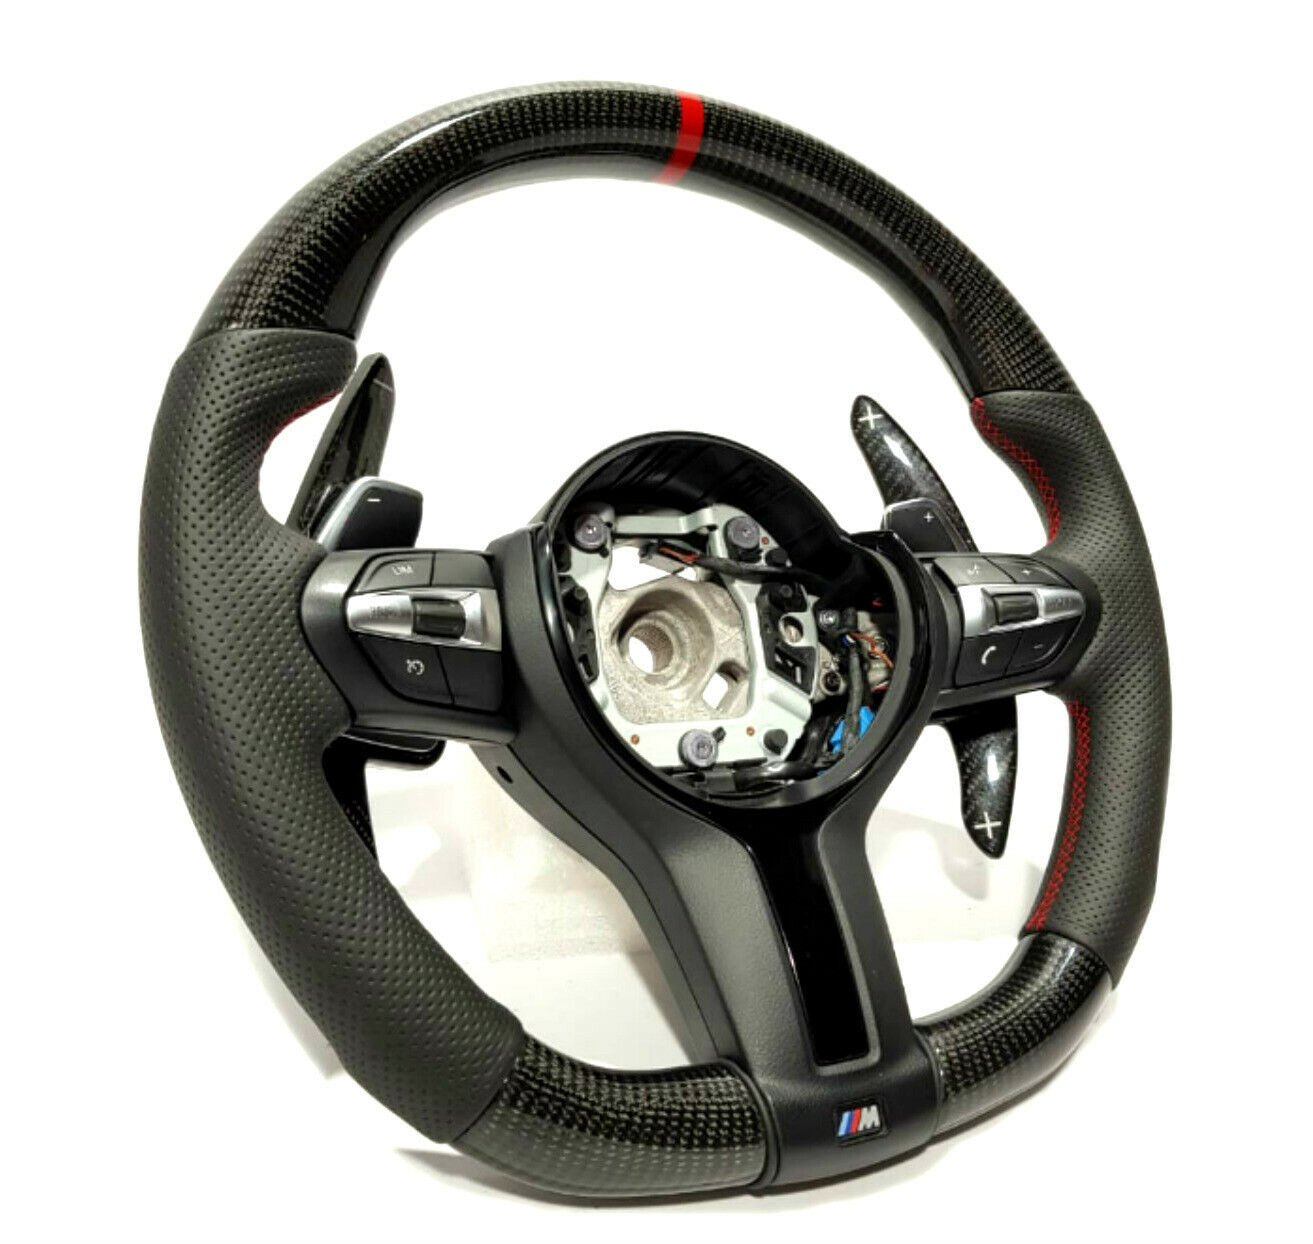 BMW F15 F30 M Style Steering Wheel Carbon Fiber Leather Paddle Shifts Red Strip